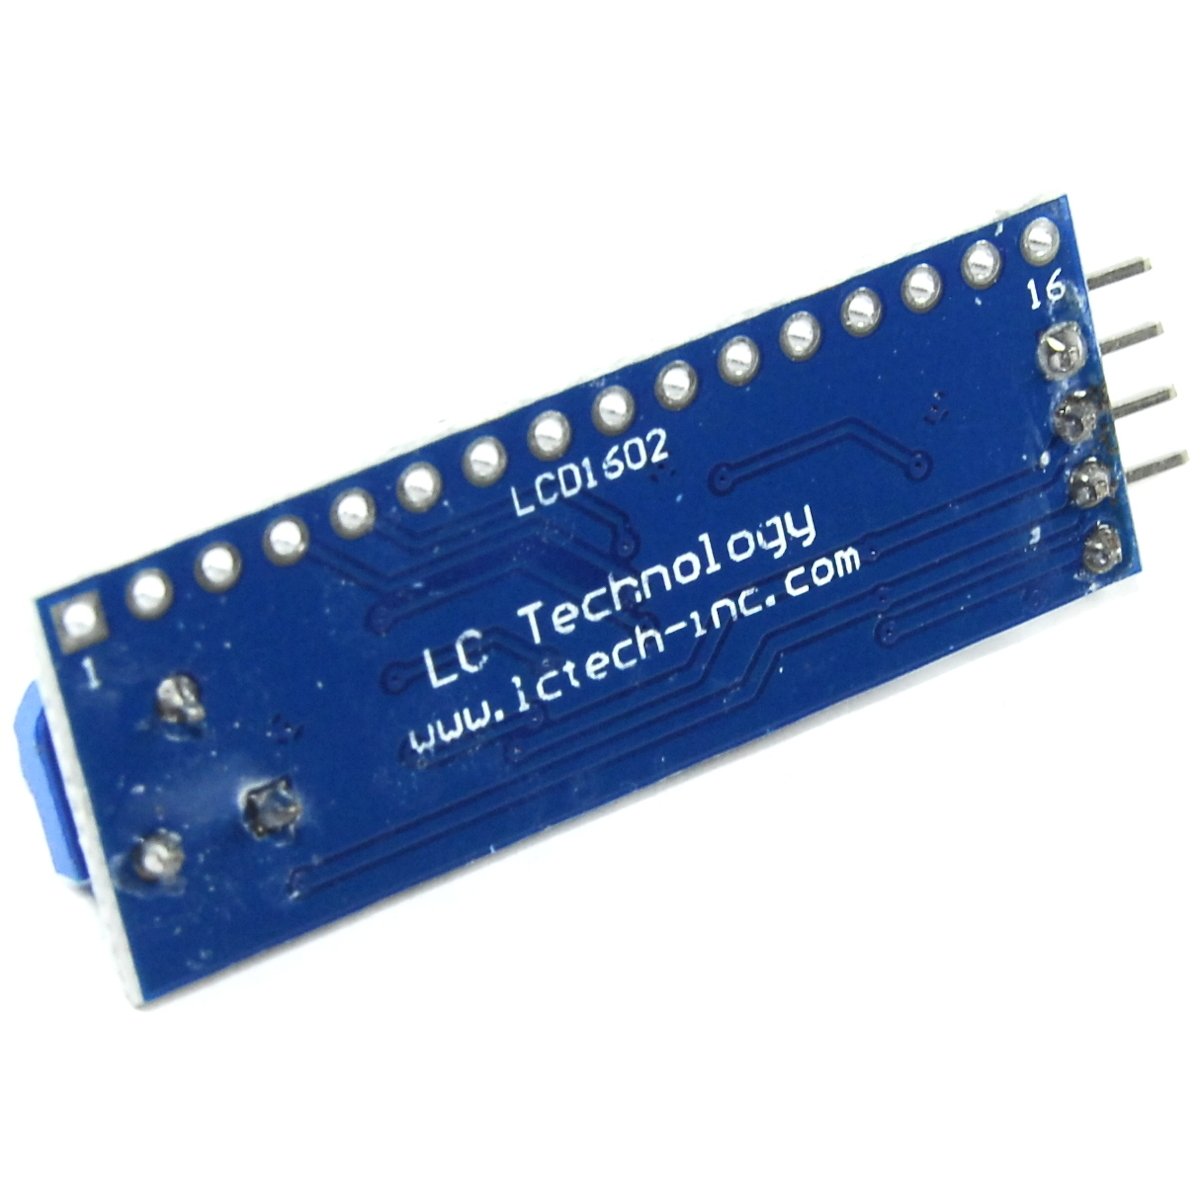 1602 LCD I2C Interface PCF8574 LC Blue Image 3